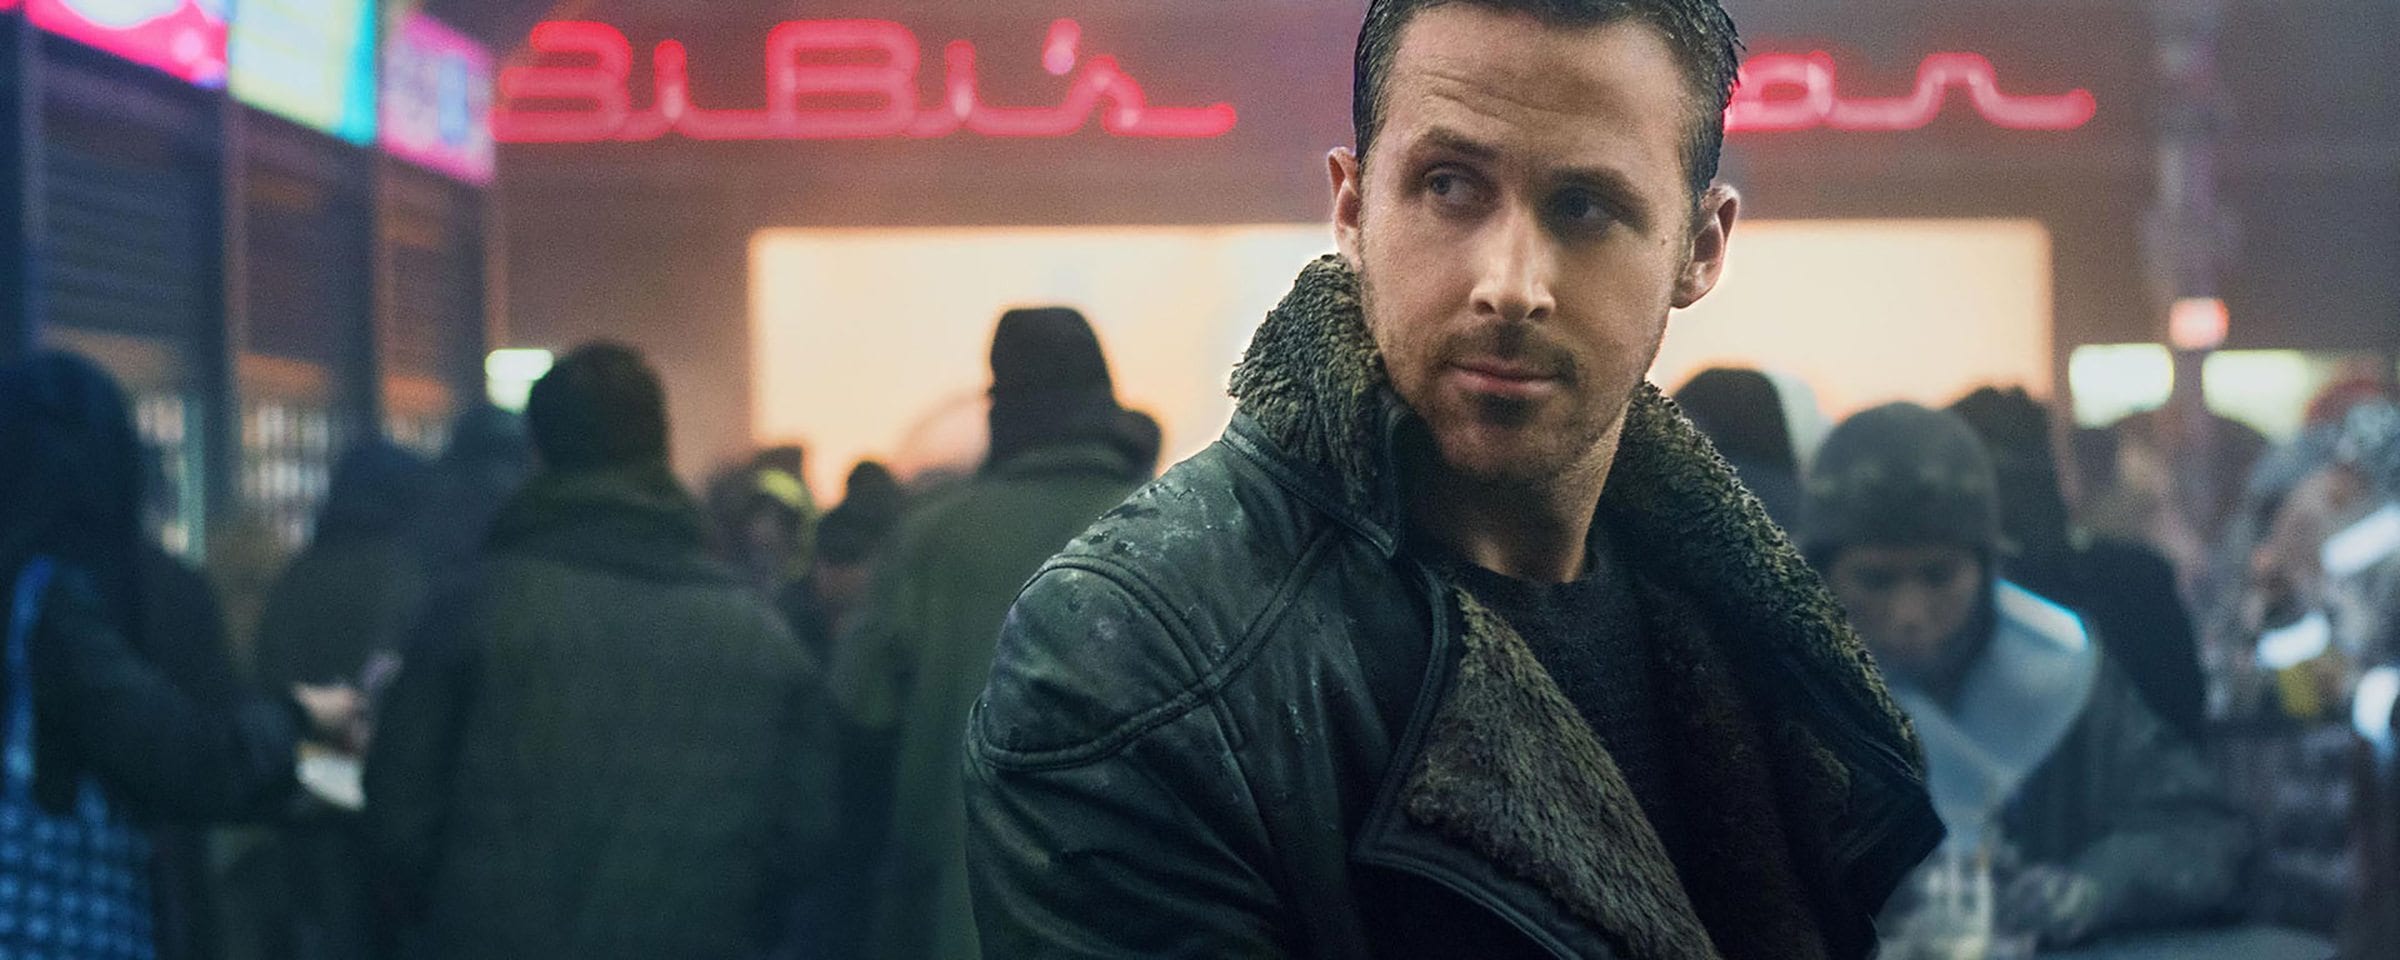 Warner Bros. Pictures debuts the first trailer for 'Blade Runner 2049', sequel to Ridley Scott’s iconic 1982 sci-fi noir film.